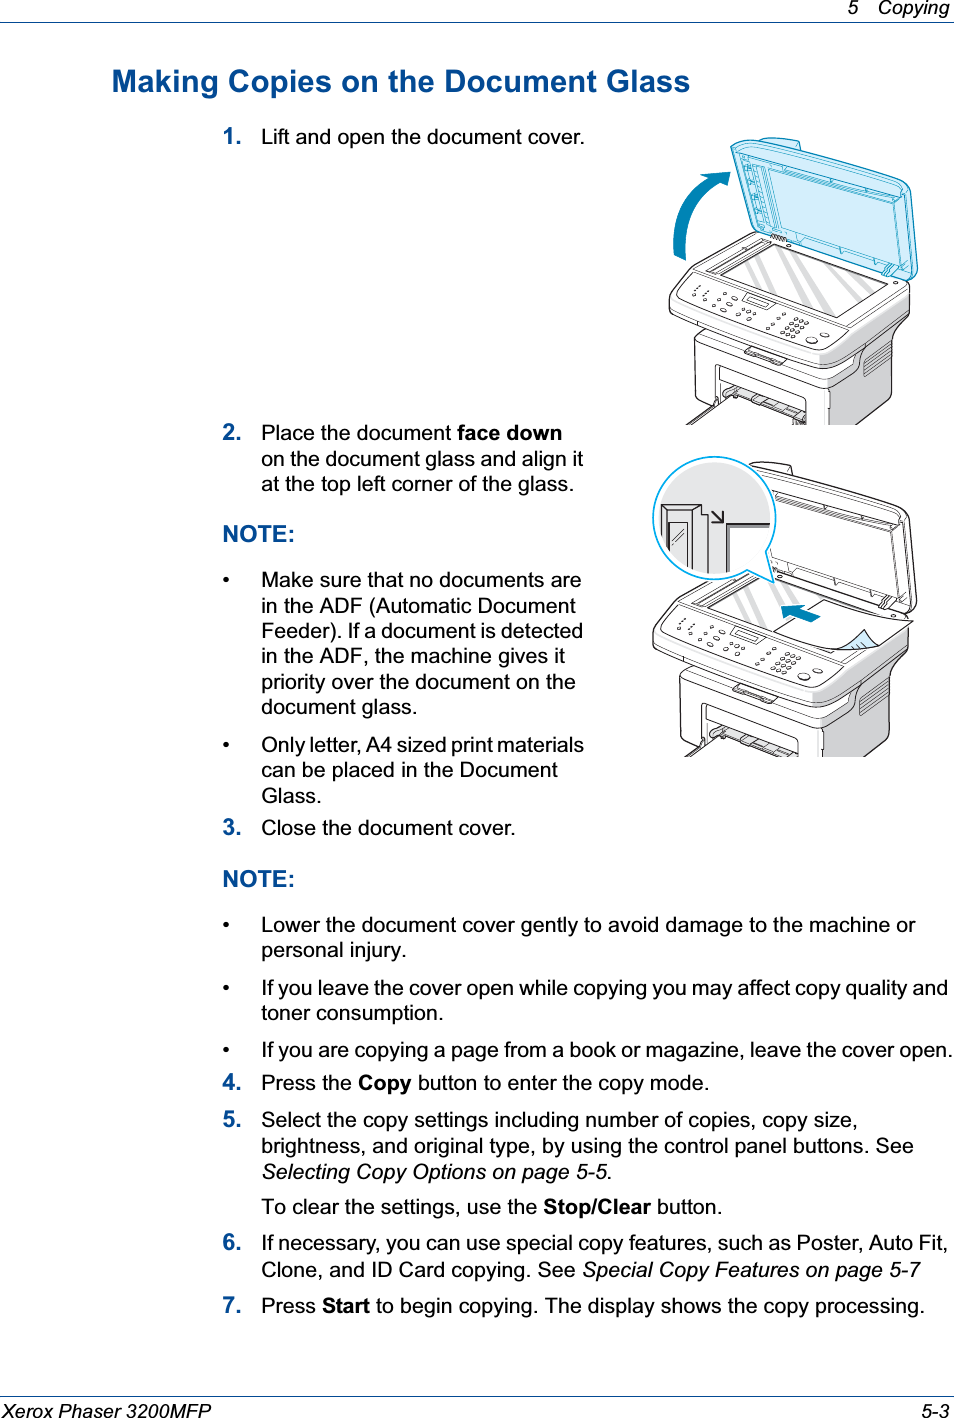 5 Copying Xerox Phaser 3200MFP 5-3Making Copies on the Document Glass1. Lift and open the document cover.2. Place the document face downon the document glass and align it at the top left corner of the glass.NOTE: • Make sure that no documents are in the ADF (Automatic Document Feeder). If a document is detected in the ADF, the machine gives it priority over the document on the document glass.• Only letter, A4 sized print materials can be placed in the Document Glass.3. Close the document cover.NOTE: • Lower the document cover gently to avoid damage to the machine or personal injury.• If you leave the cover open while copying you may affect copy quality and toner consumption.• If you are copying a page from a book or magazine, leave the cover open.4. Press the Copy button to enter the copy mode.5. Select the copy settings including number of copies, copy size, brightness, and original type, by using the control panel buttons. See Selecting Copy Options on page 5-5.To clear the settings, use the Stop/Clear button.6. If necessary, you can use special copy features, such as Poster, Auto Fit, Clone, and ID Card copying. See Special Copy Features on page 5-77. Press Start to begin copying. The display shows the copy processing.